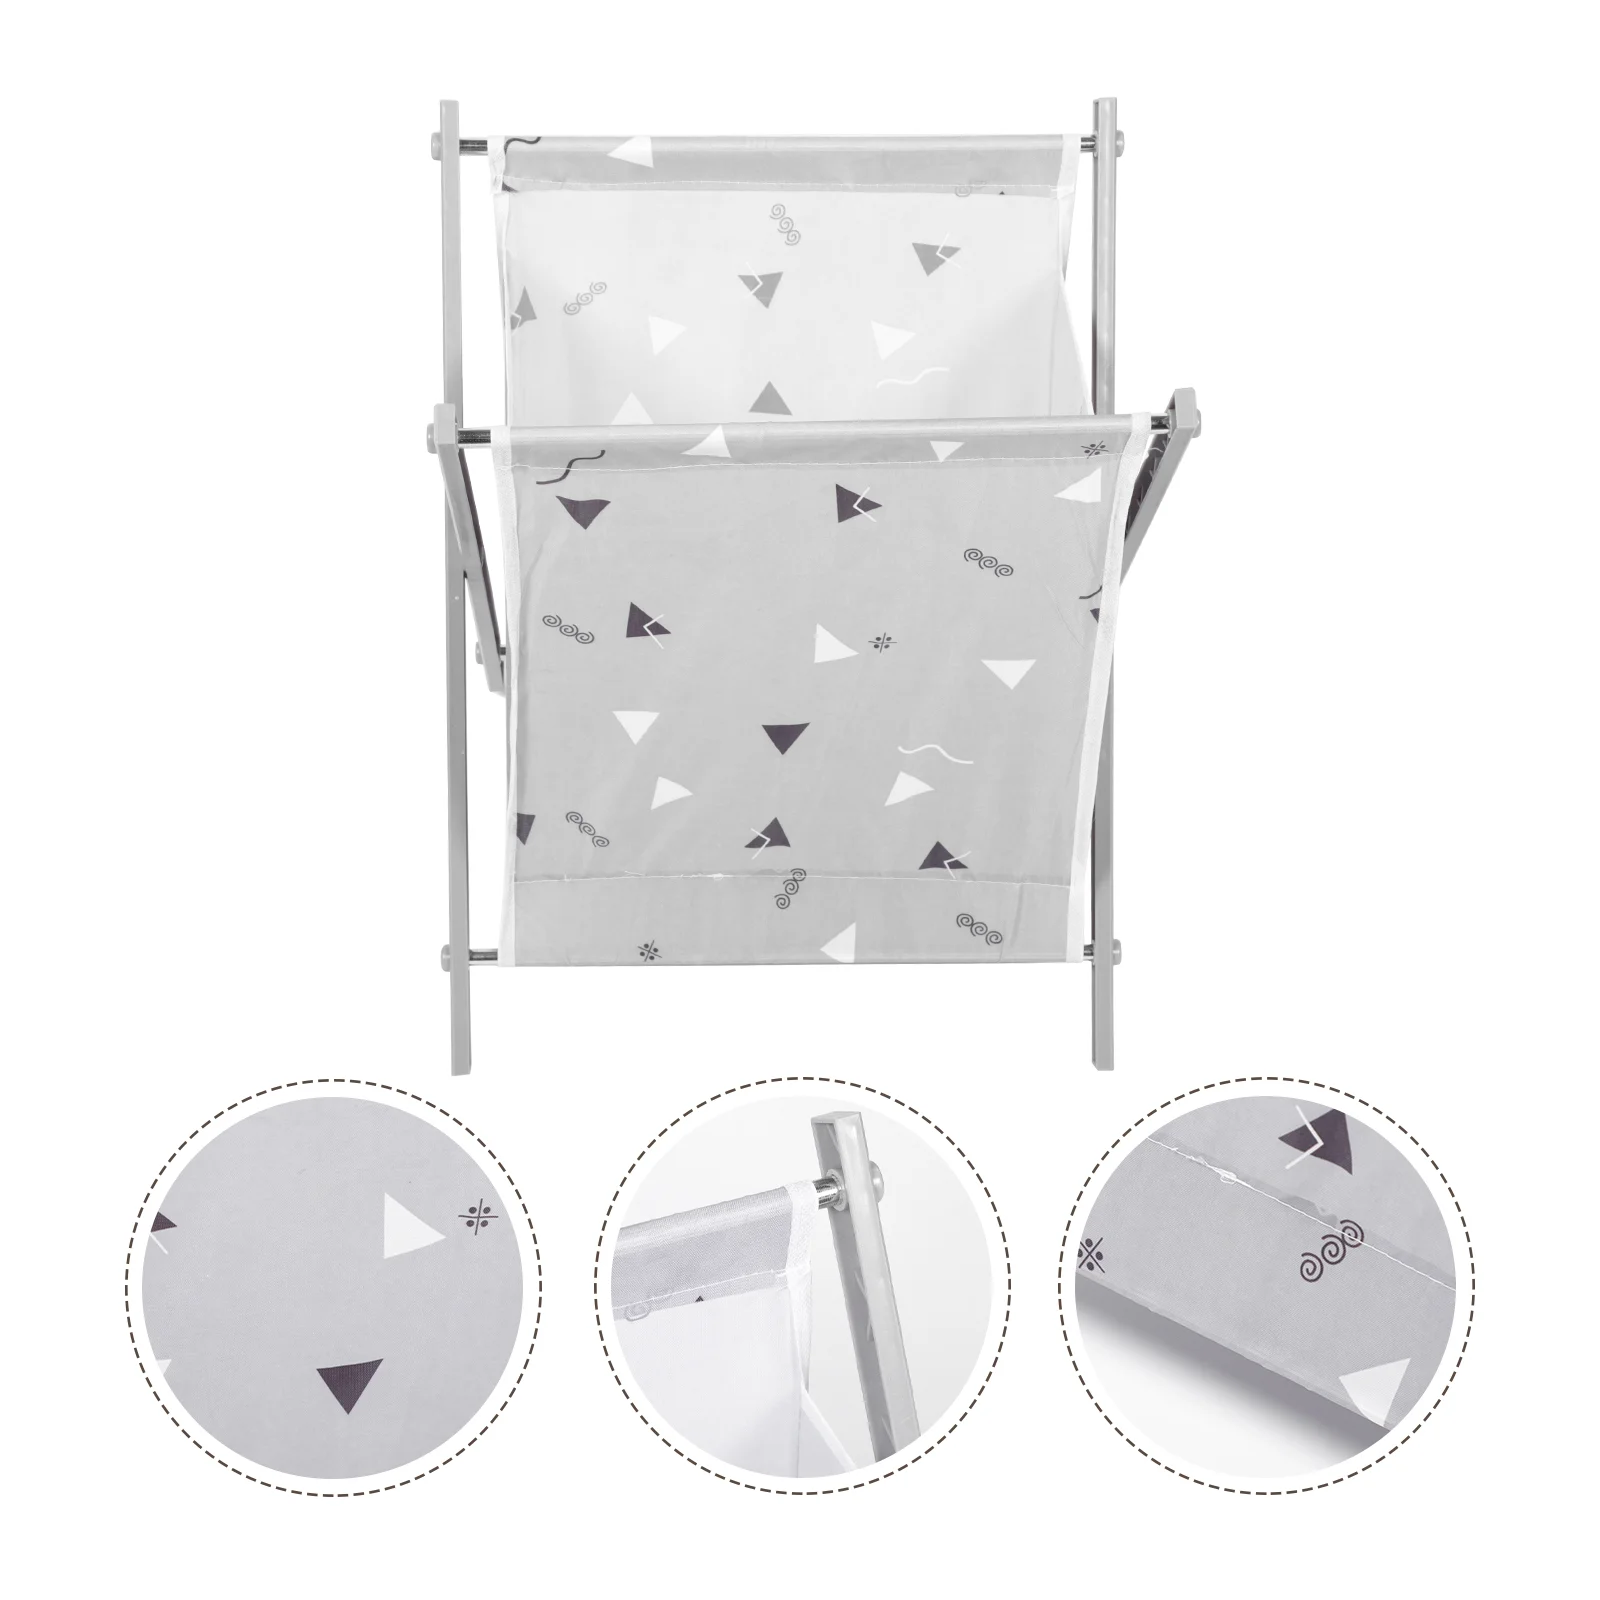 

Laundry Basket Sorter Folding Hamper Bedroom Hampers Nursery Replacement Decorative Storage Section Holder Container Clothes